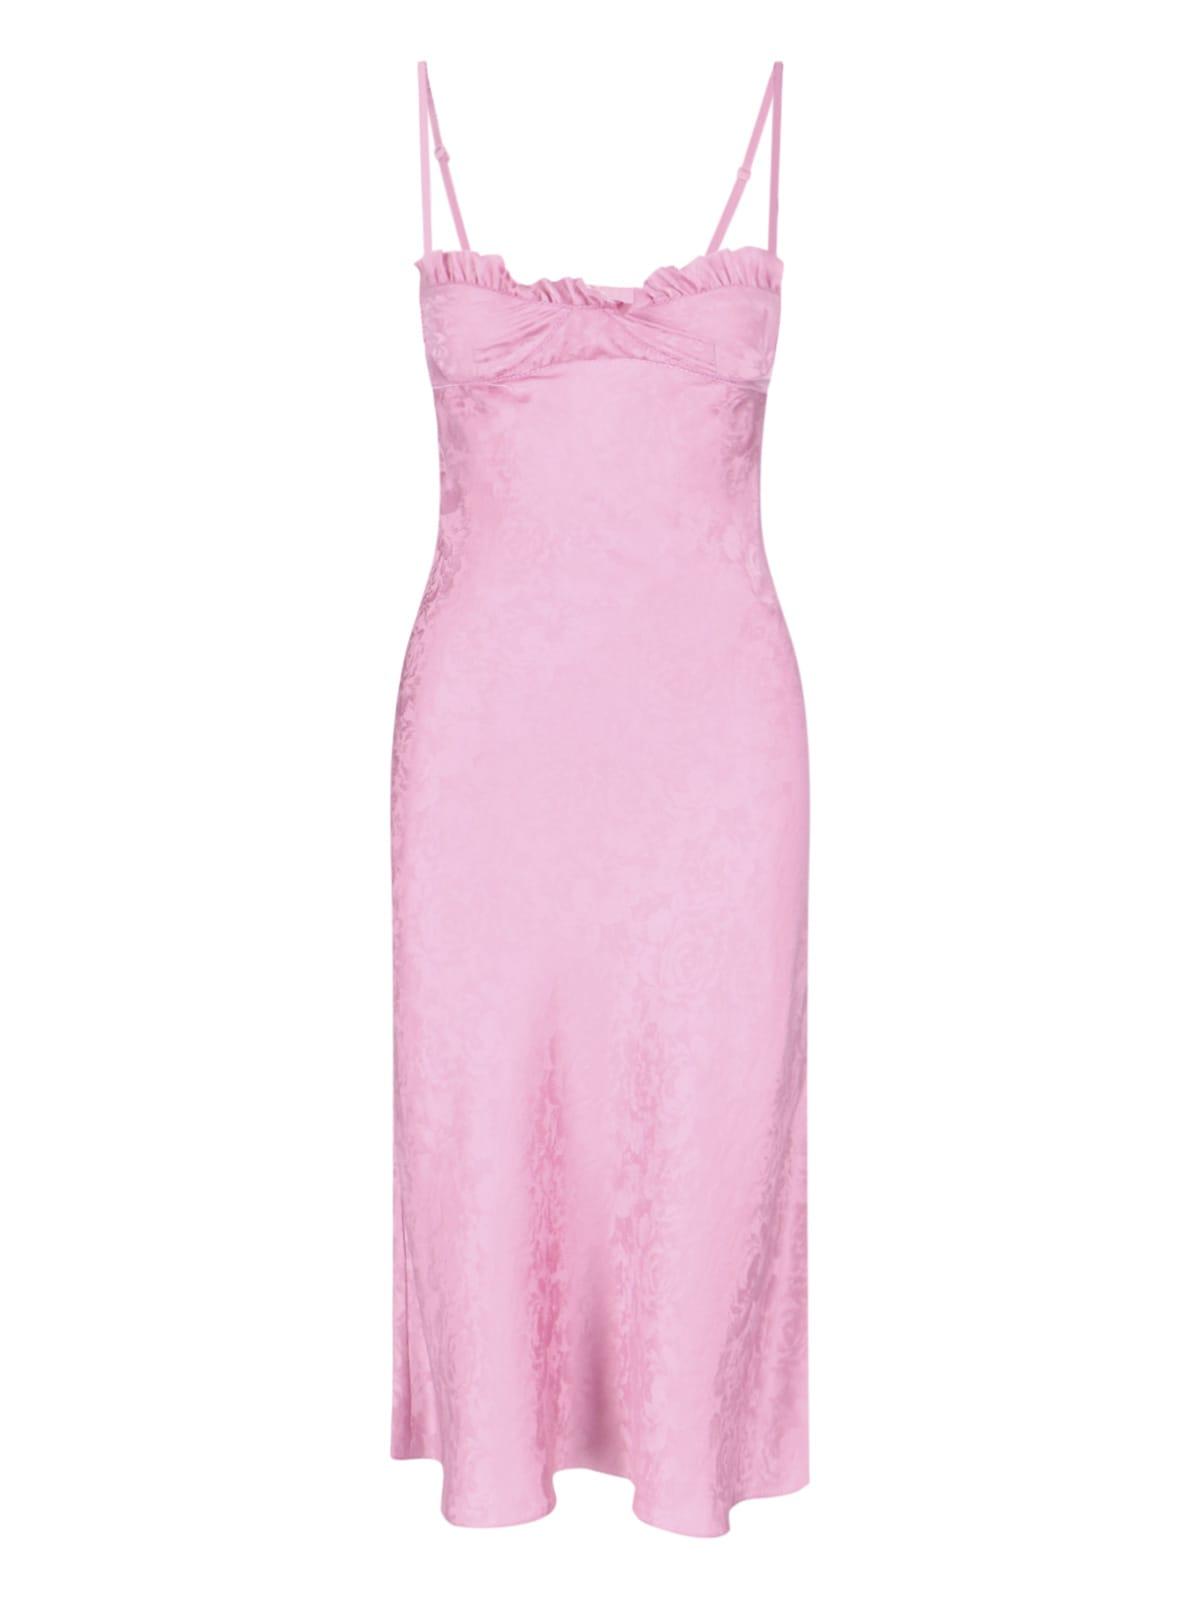 THE GARMENT Dress in Pink | Lyst